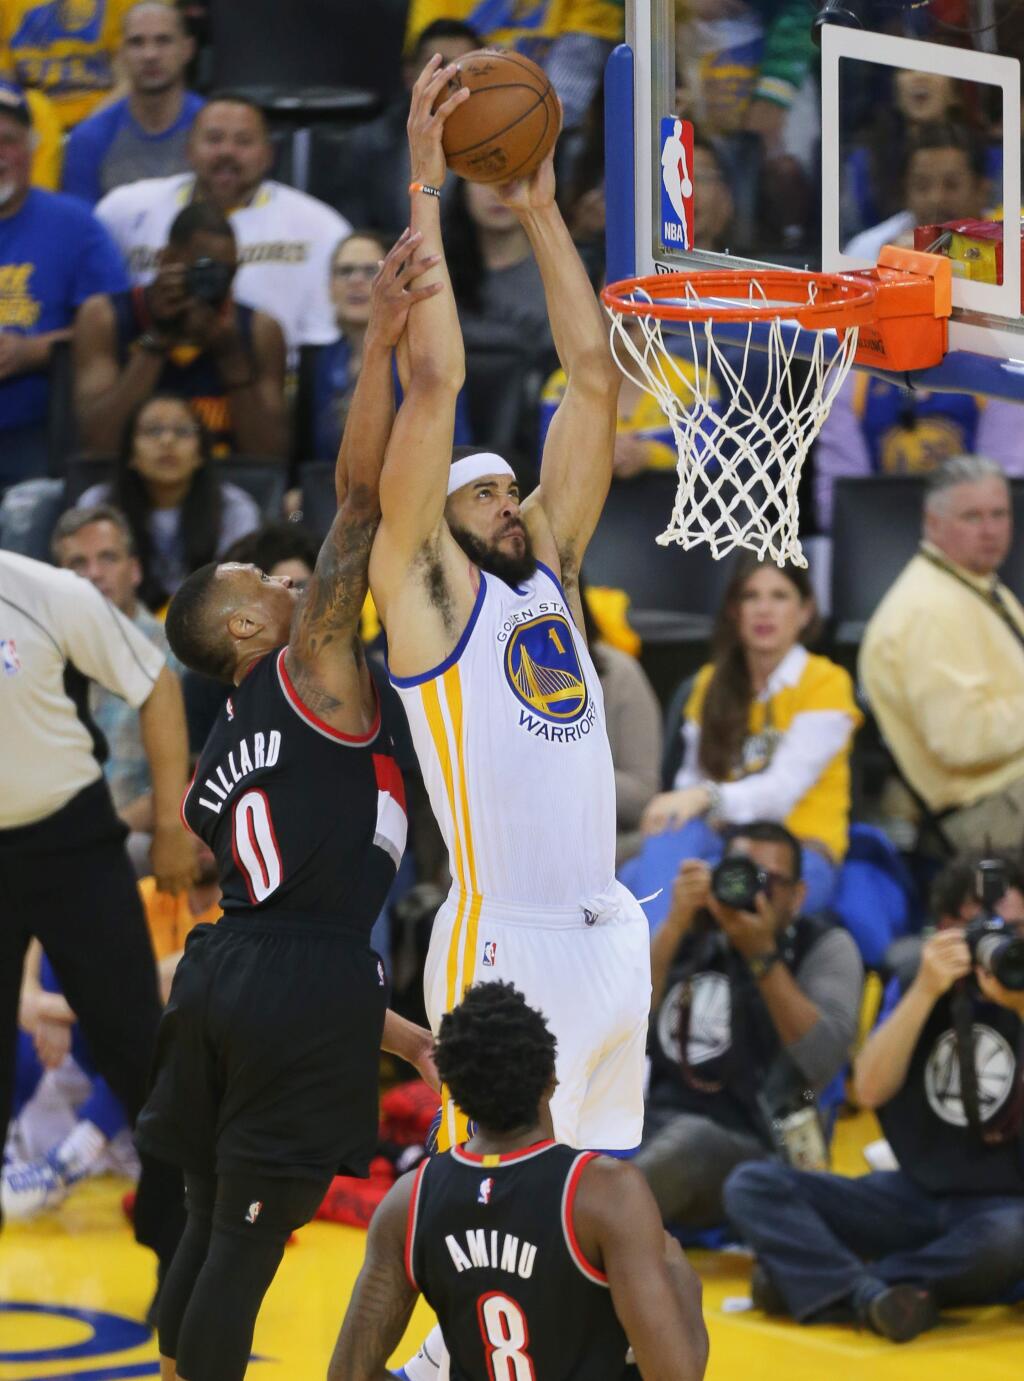 Golden State Warriors center JaVale McGee throws down a dunk over Portland Trailblazers guard Damian Lillard during Game 2 of the first round of NBA playoffs in Oakland on Wednesday, April 19, 2017. (Christopher Chung/ The Press Democrat)